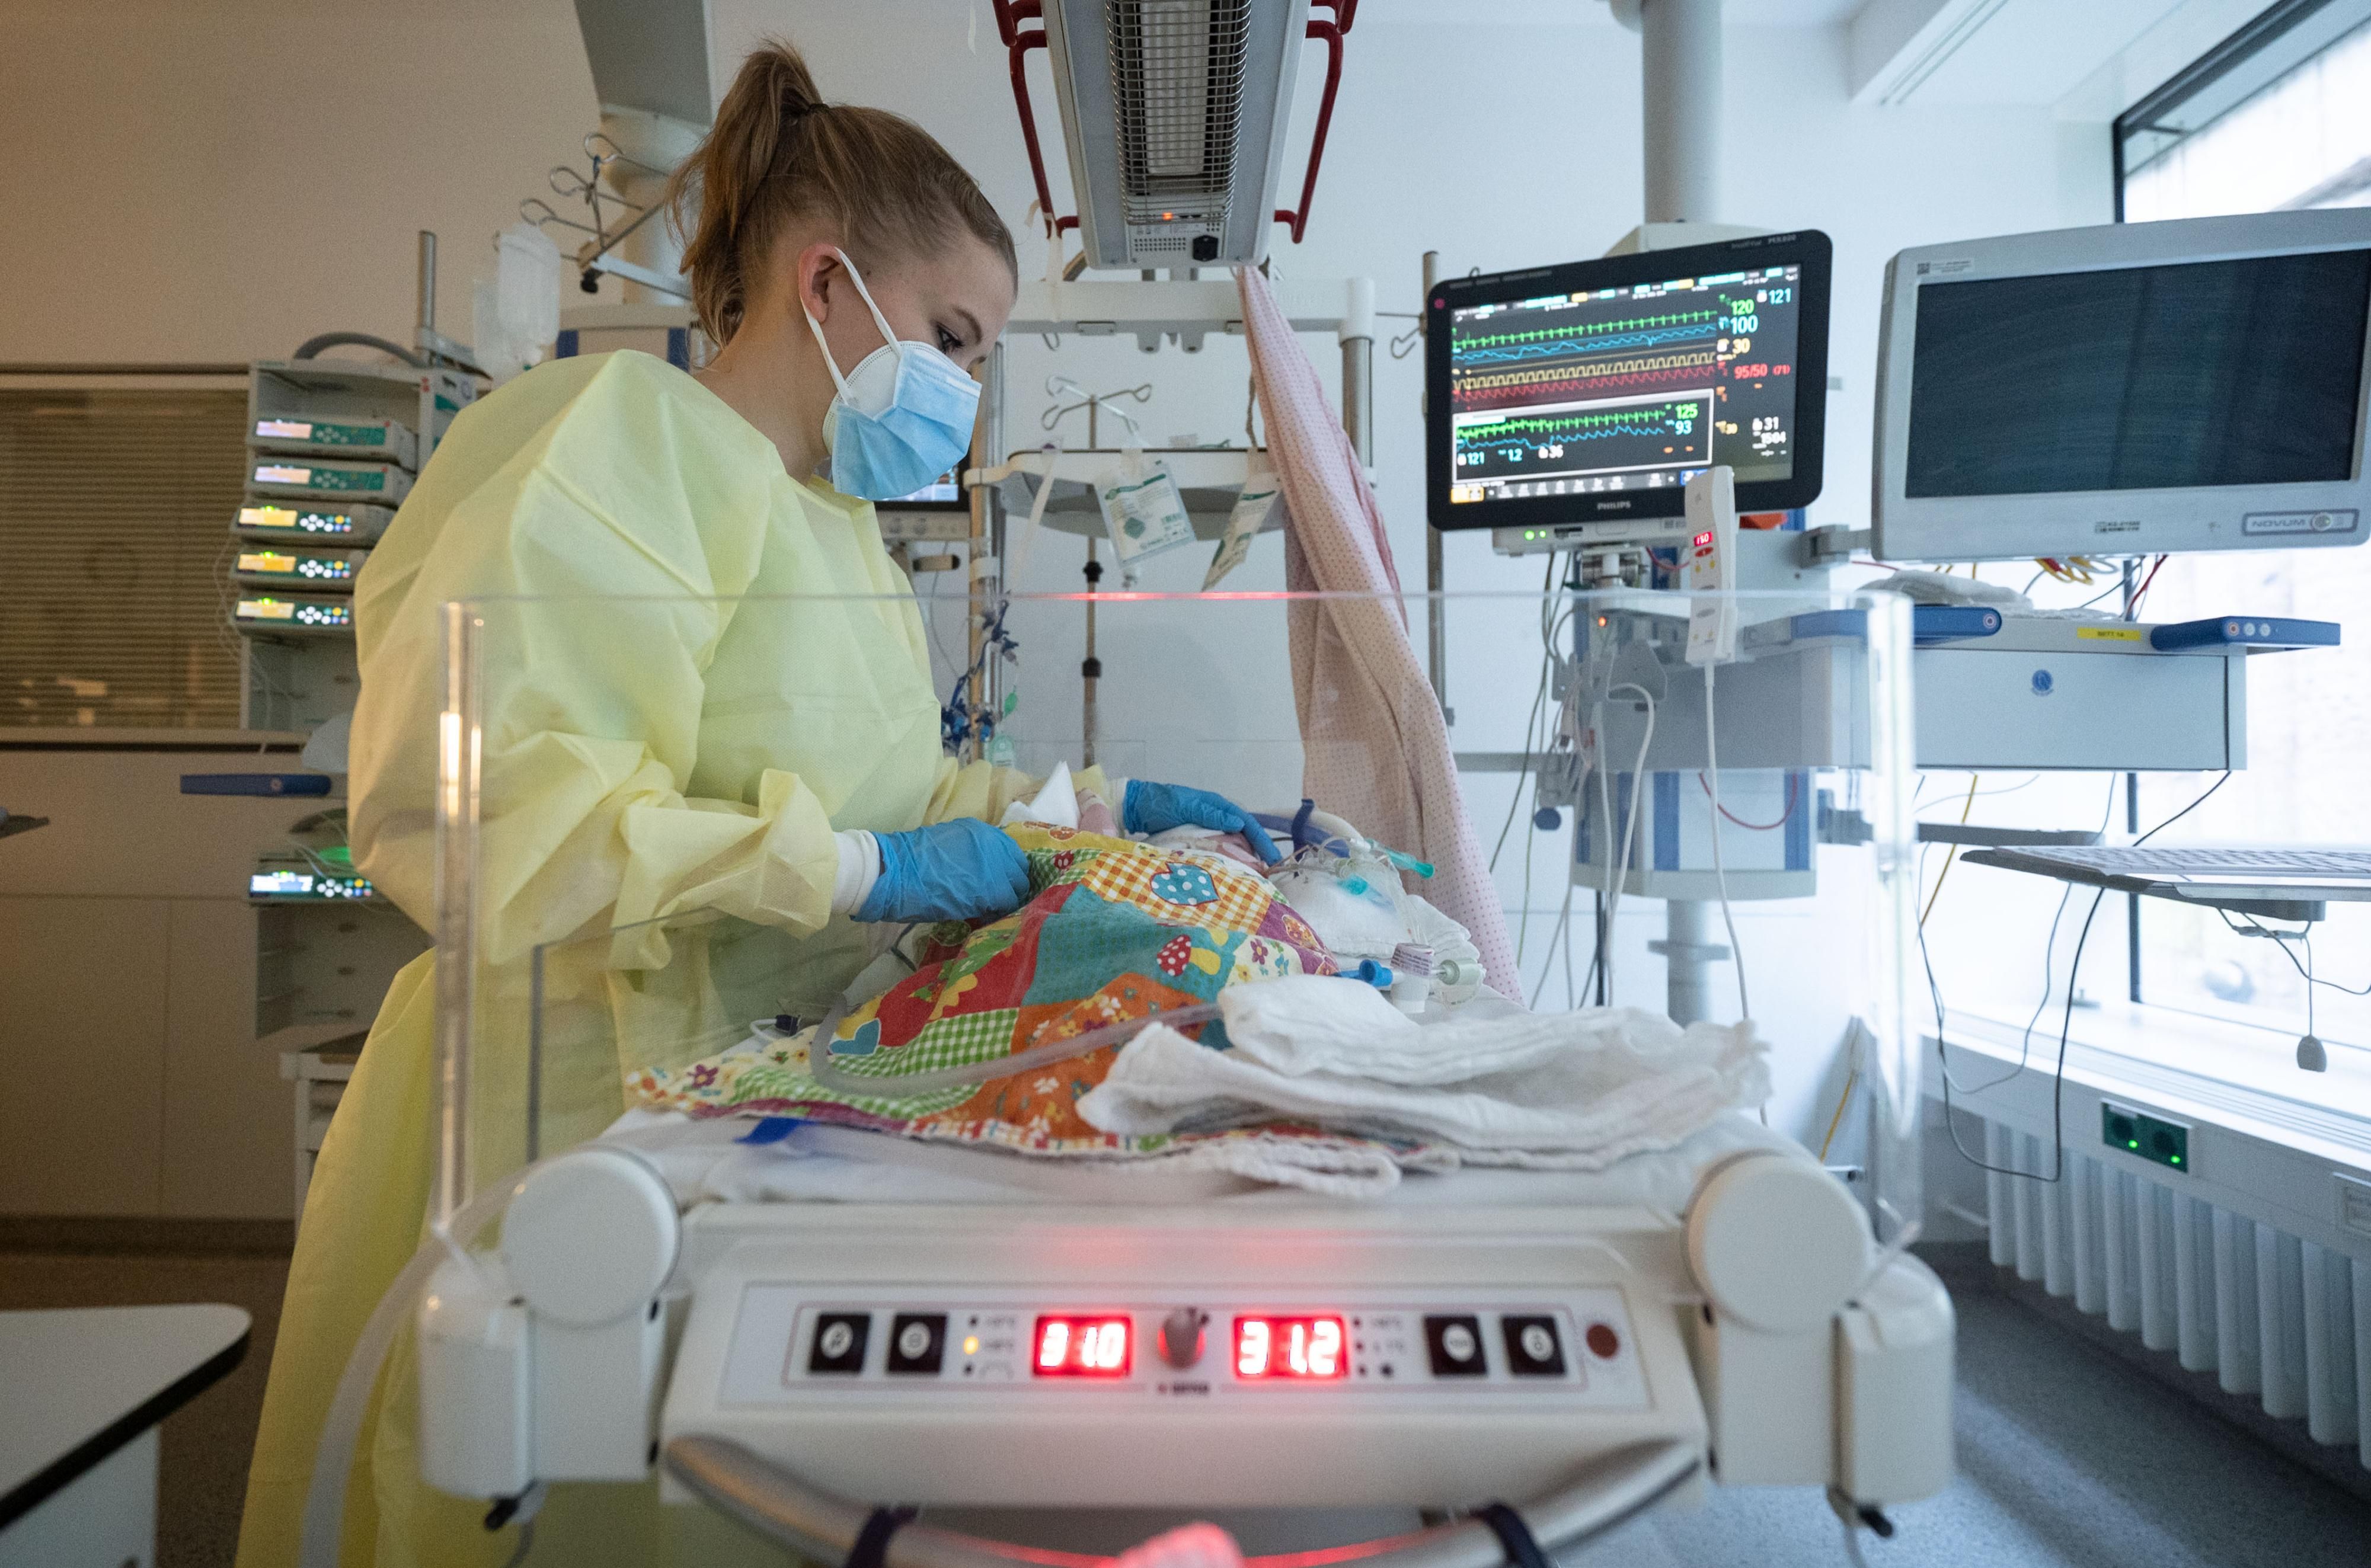 A nurse cares for a young patient with RSV